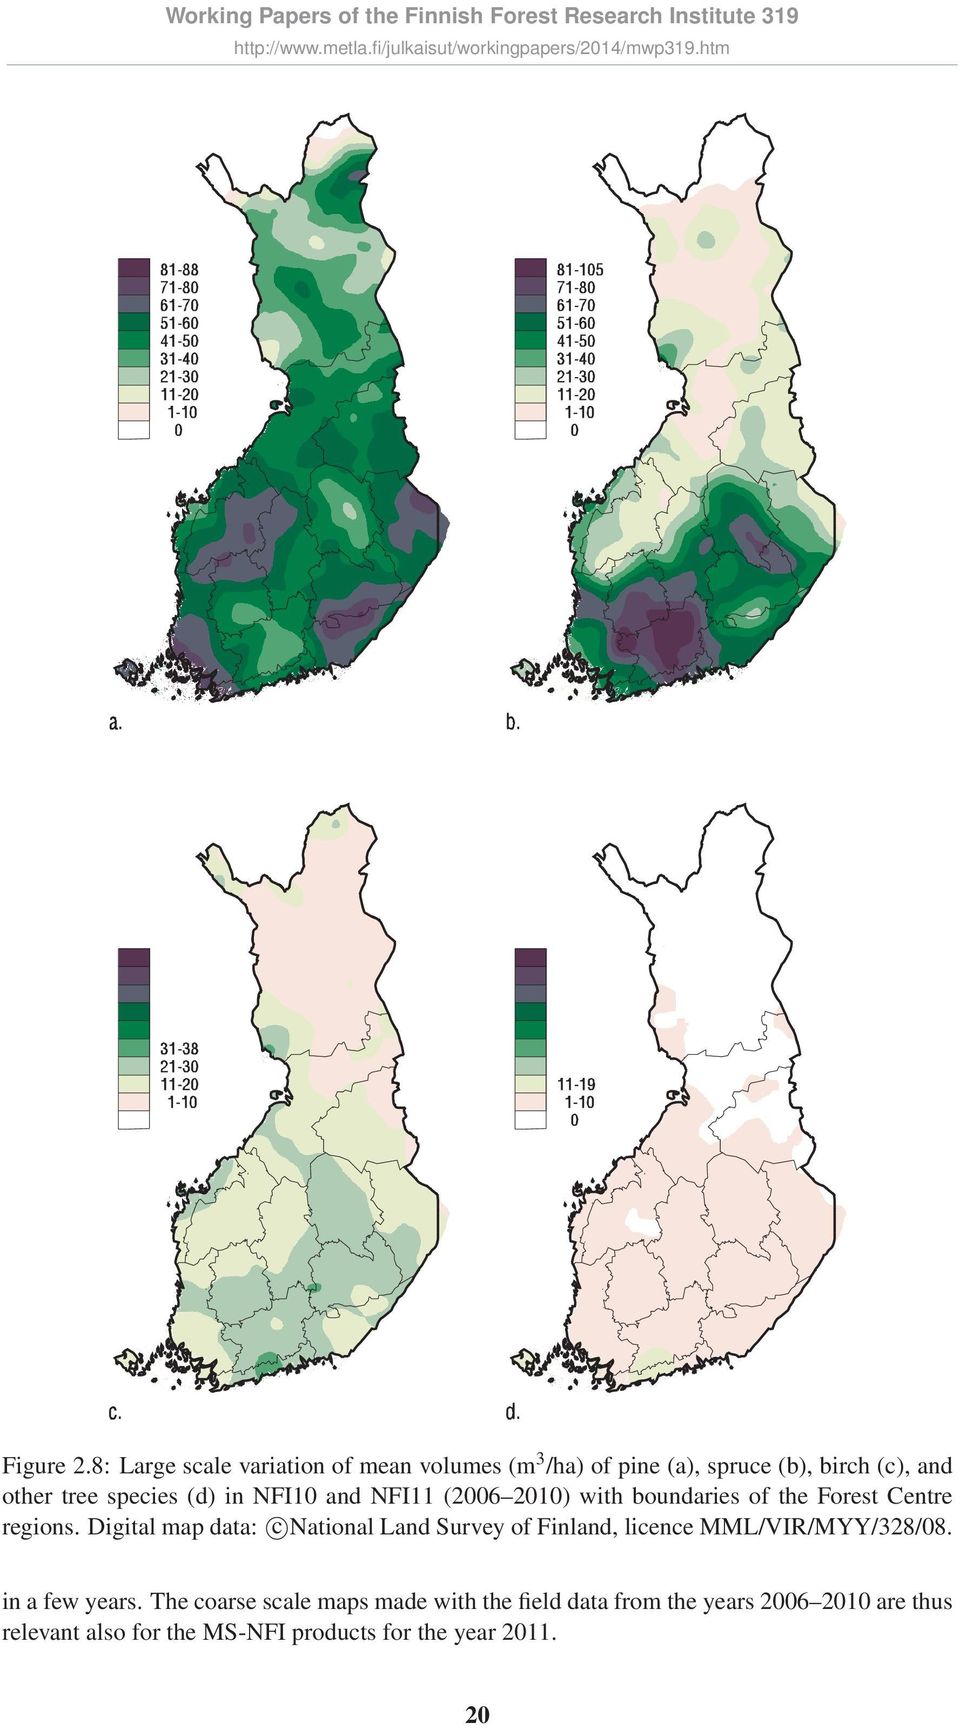 (d) in NFI10 and NFI11 (2006 2010) with boundaries of the Forest Centre regions.